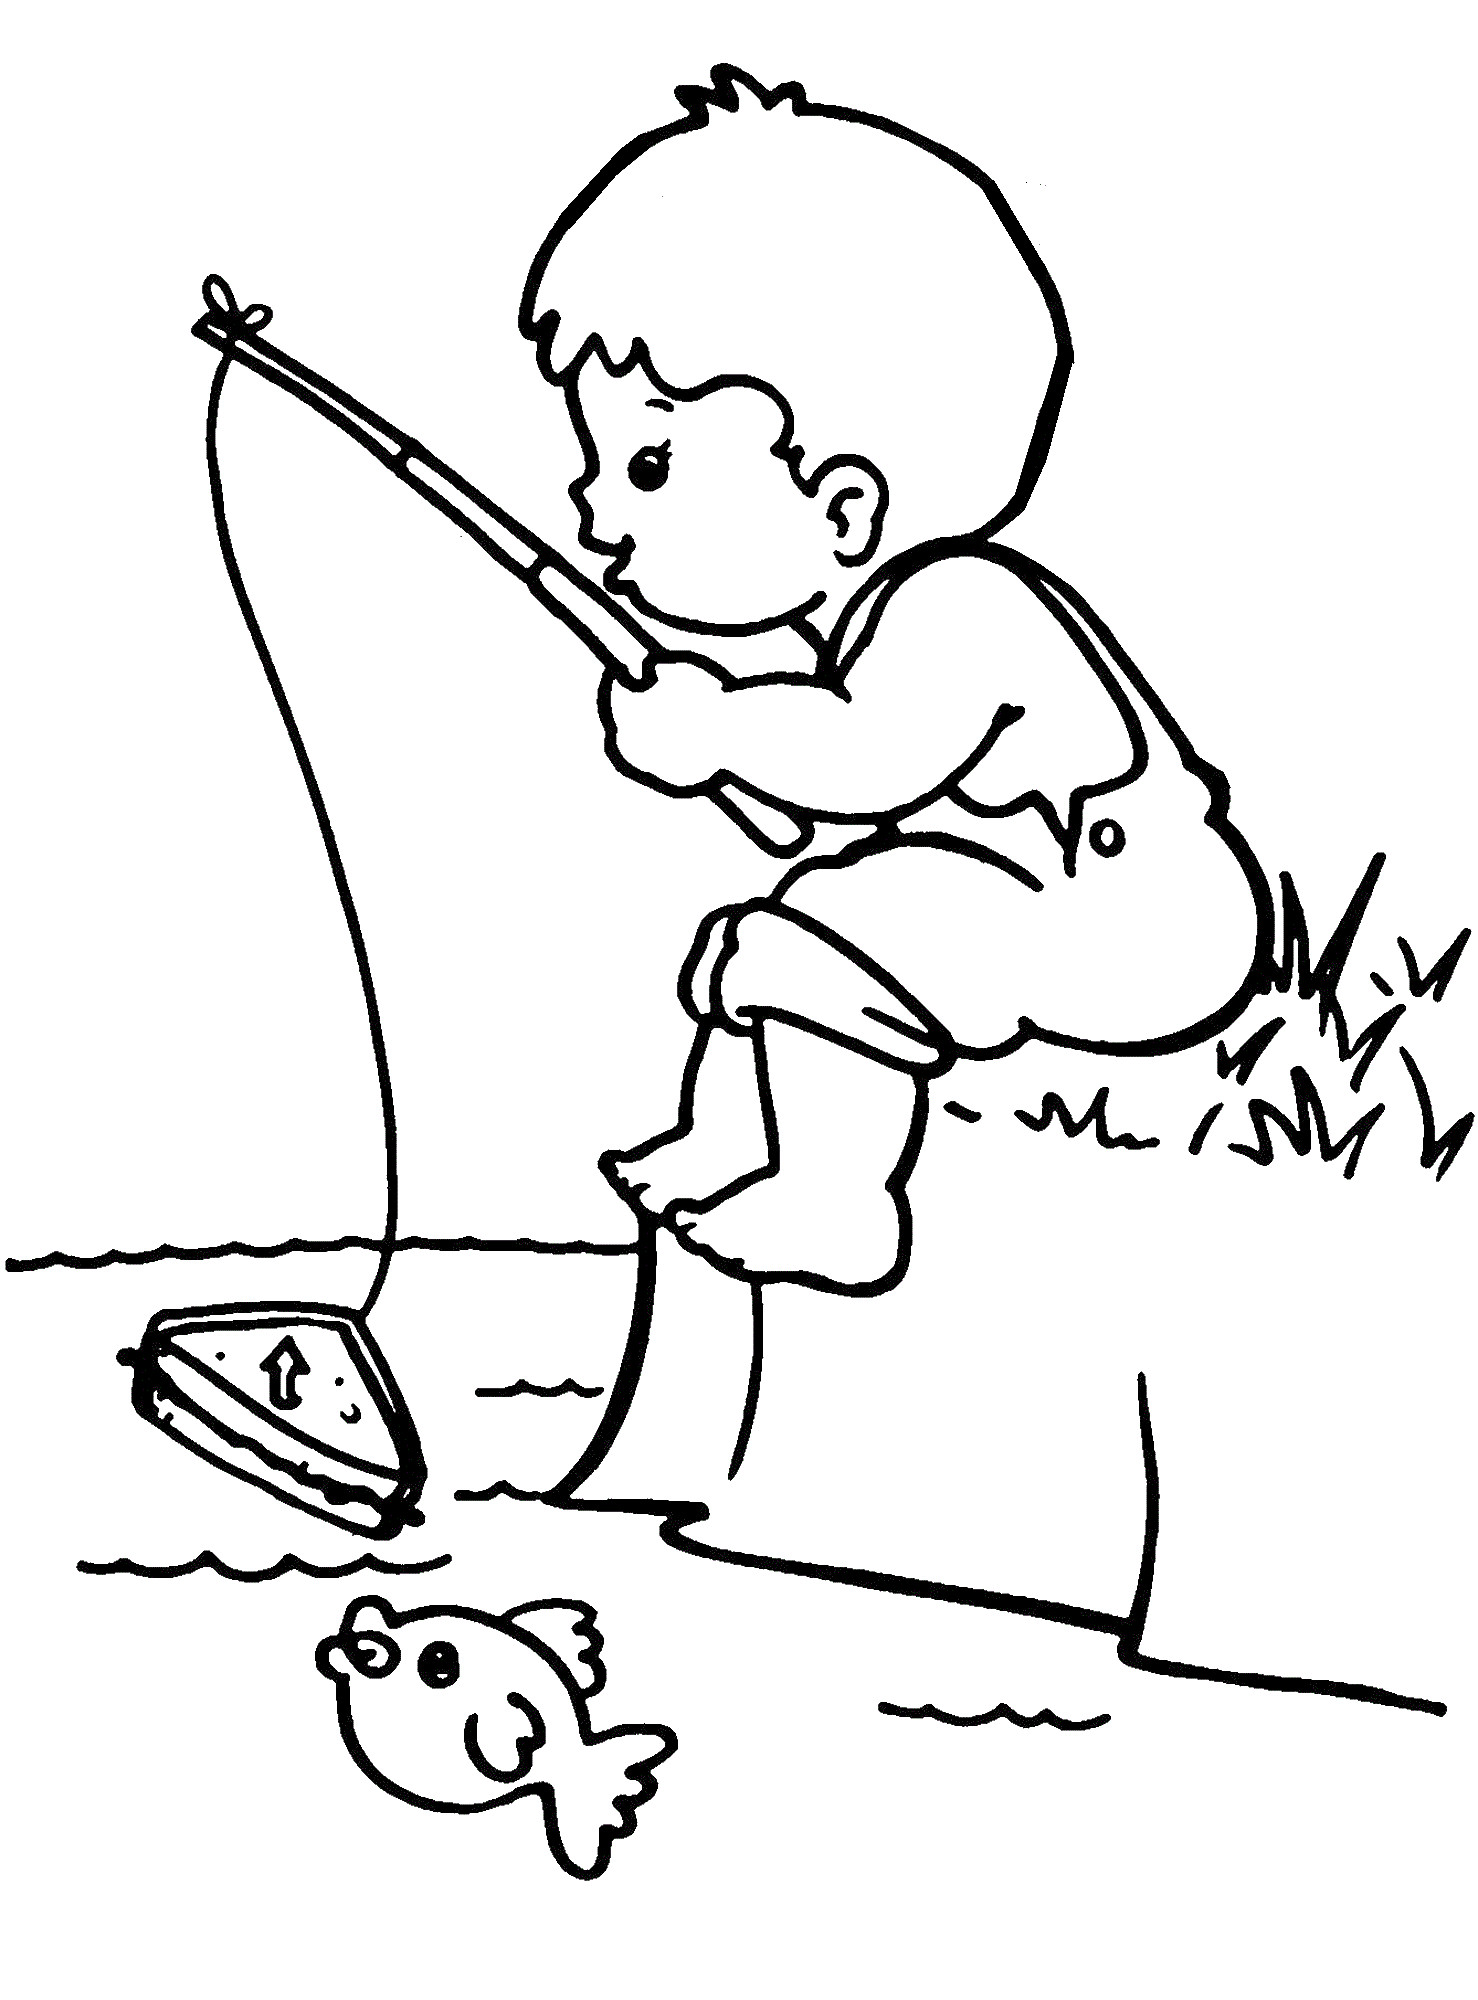 Coloring Pages For Boys Simple
 Fishing Coloring Pages Best Coloring Pages For Kids